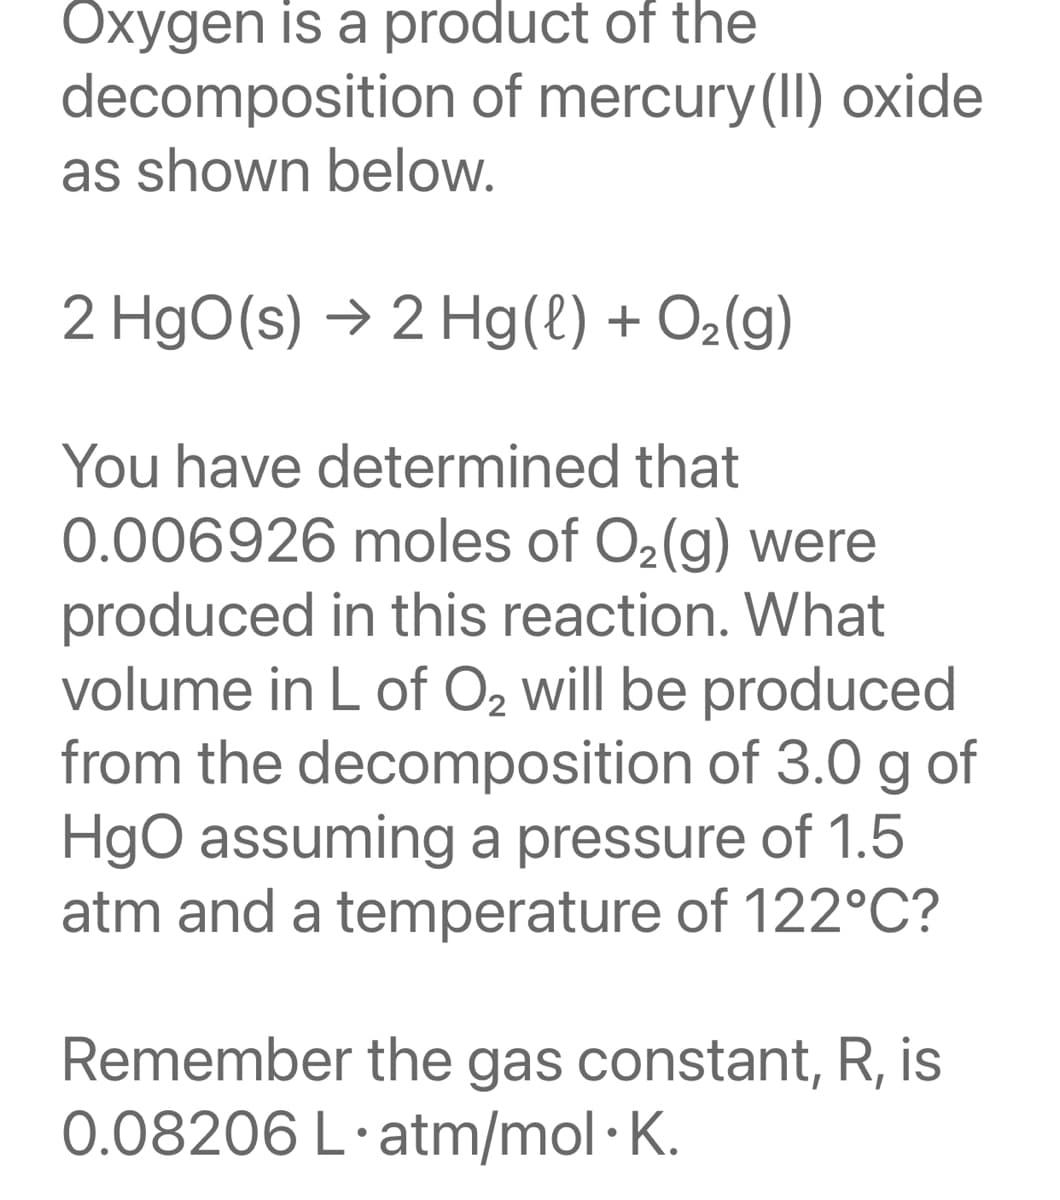 Oxygen is a product of the
decomposition of mercury(II) oxide
as shown below.
2 HgO(s) → 2 Hg(l) + O2(g)
You have determined that
0.006926 moles of O2(g) were
produced in this reaction. What
volume in L of O2 will be produced
from the decomposition of 3.0 g
HgO assuming a pressure of 1.5
atm and a temperature of 122°C?
of
Remember the gas constant, R, is
0.08206 L·atm/mol ·K.
